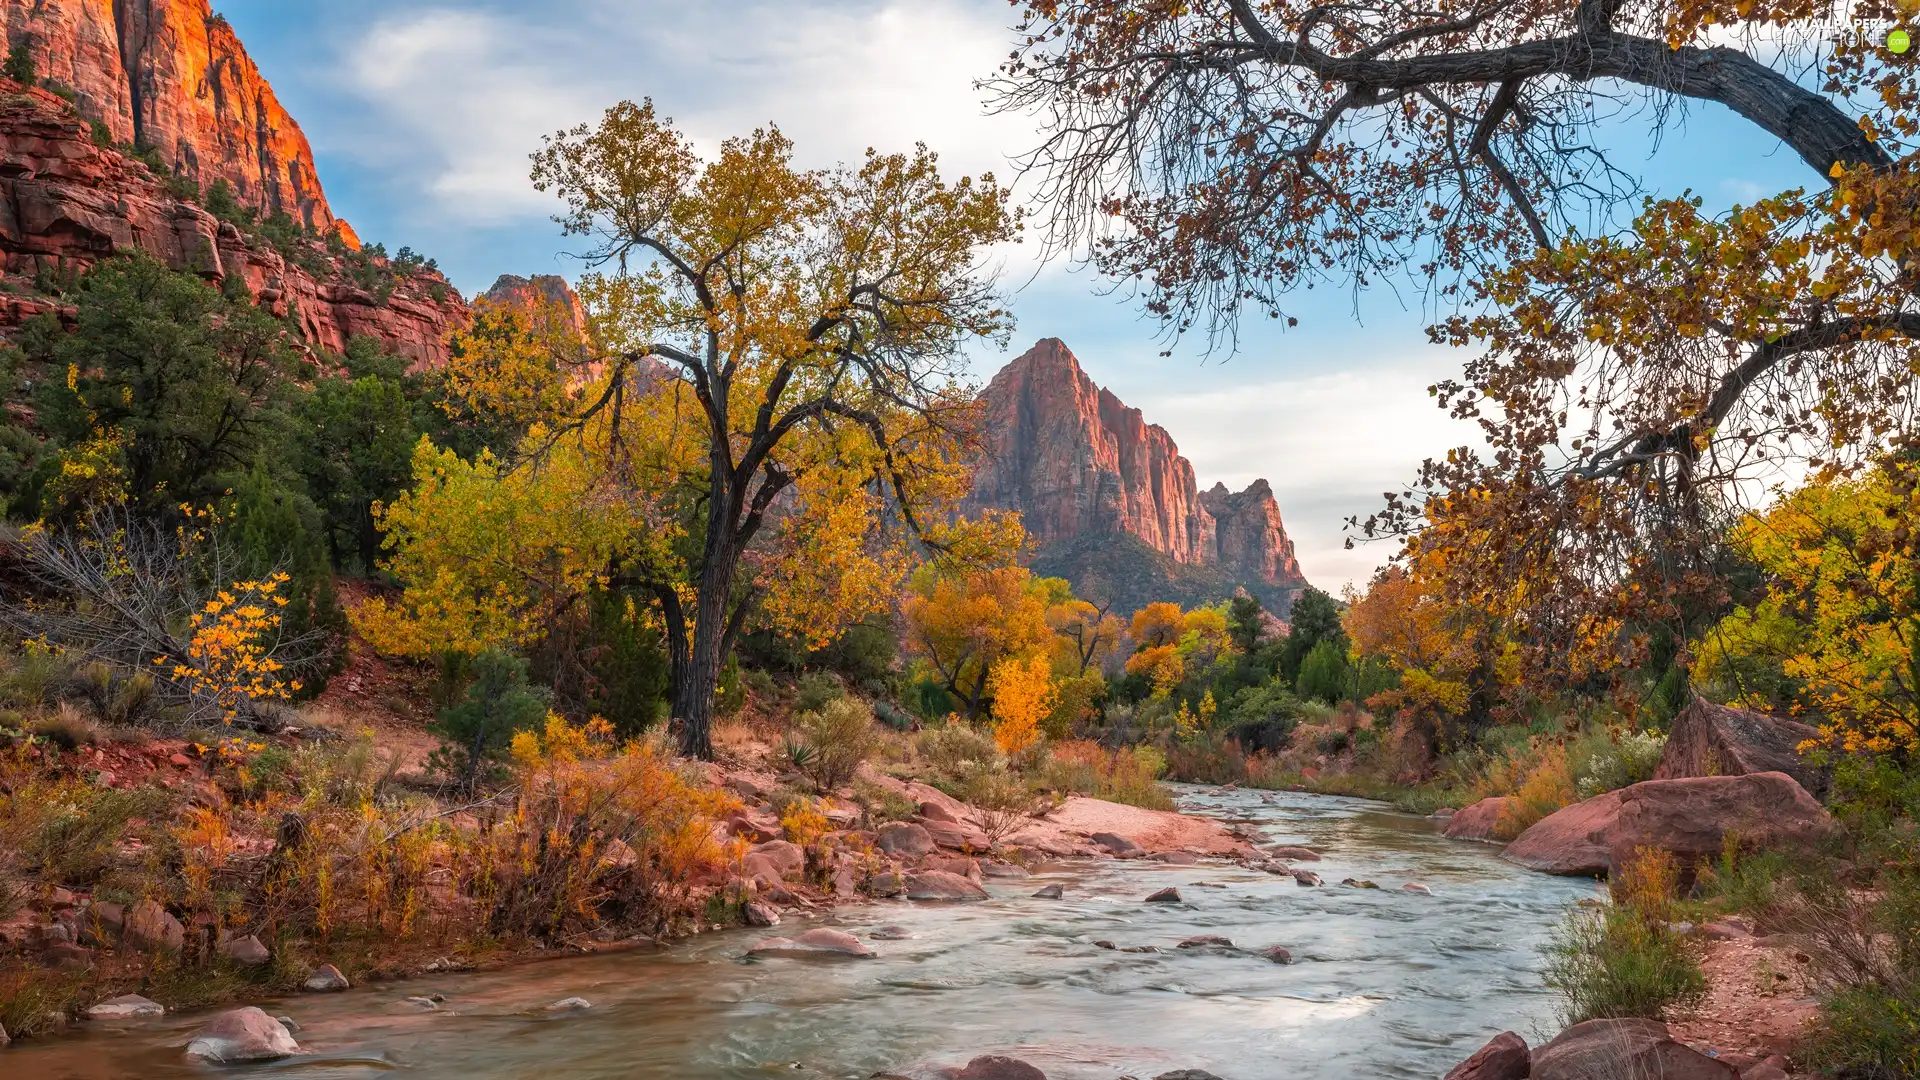 trees, viewes, The United States, Virgin River, Utah State, Watchman Mountains, Zion National Park, Stones